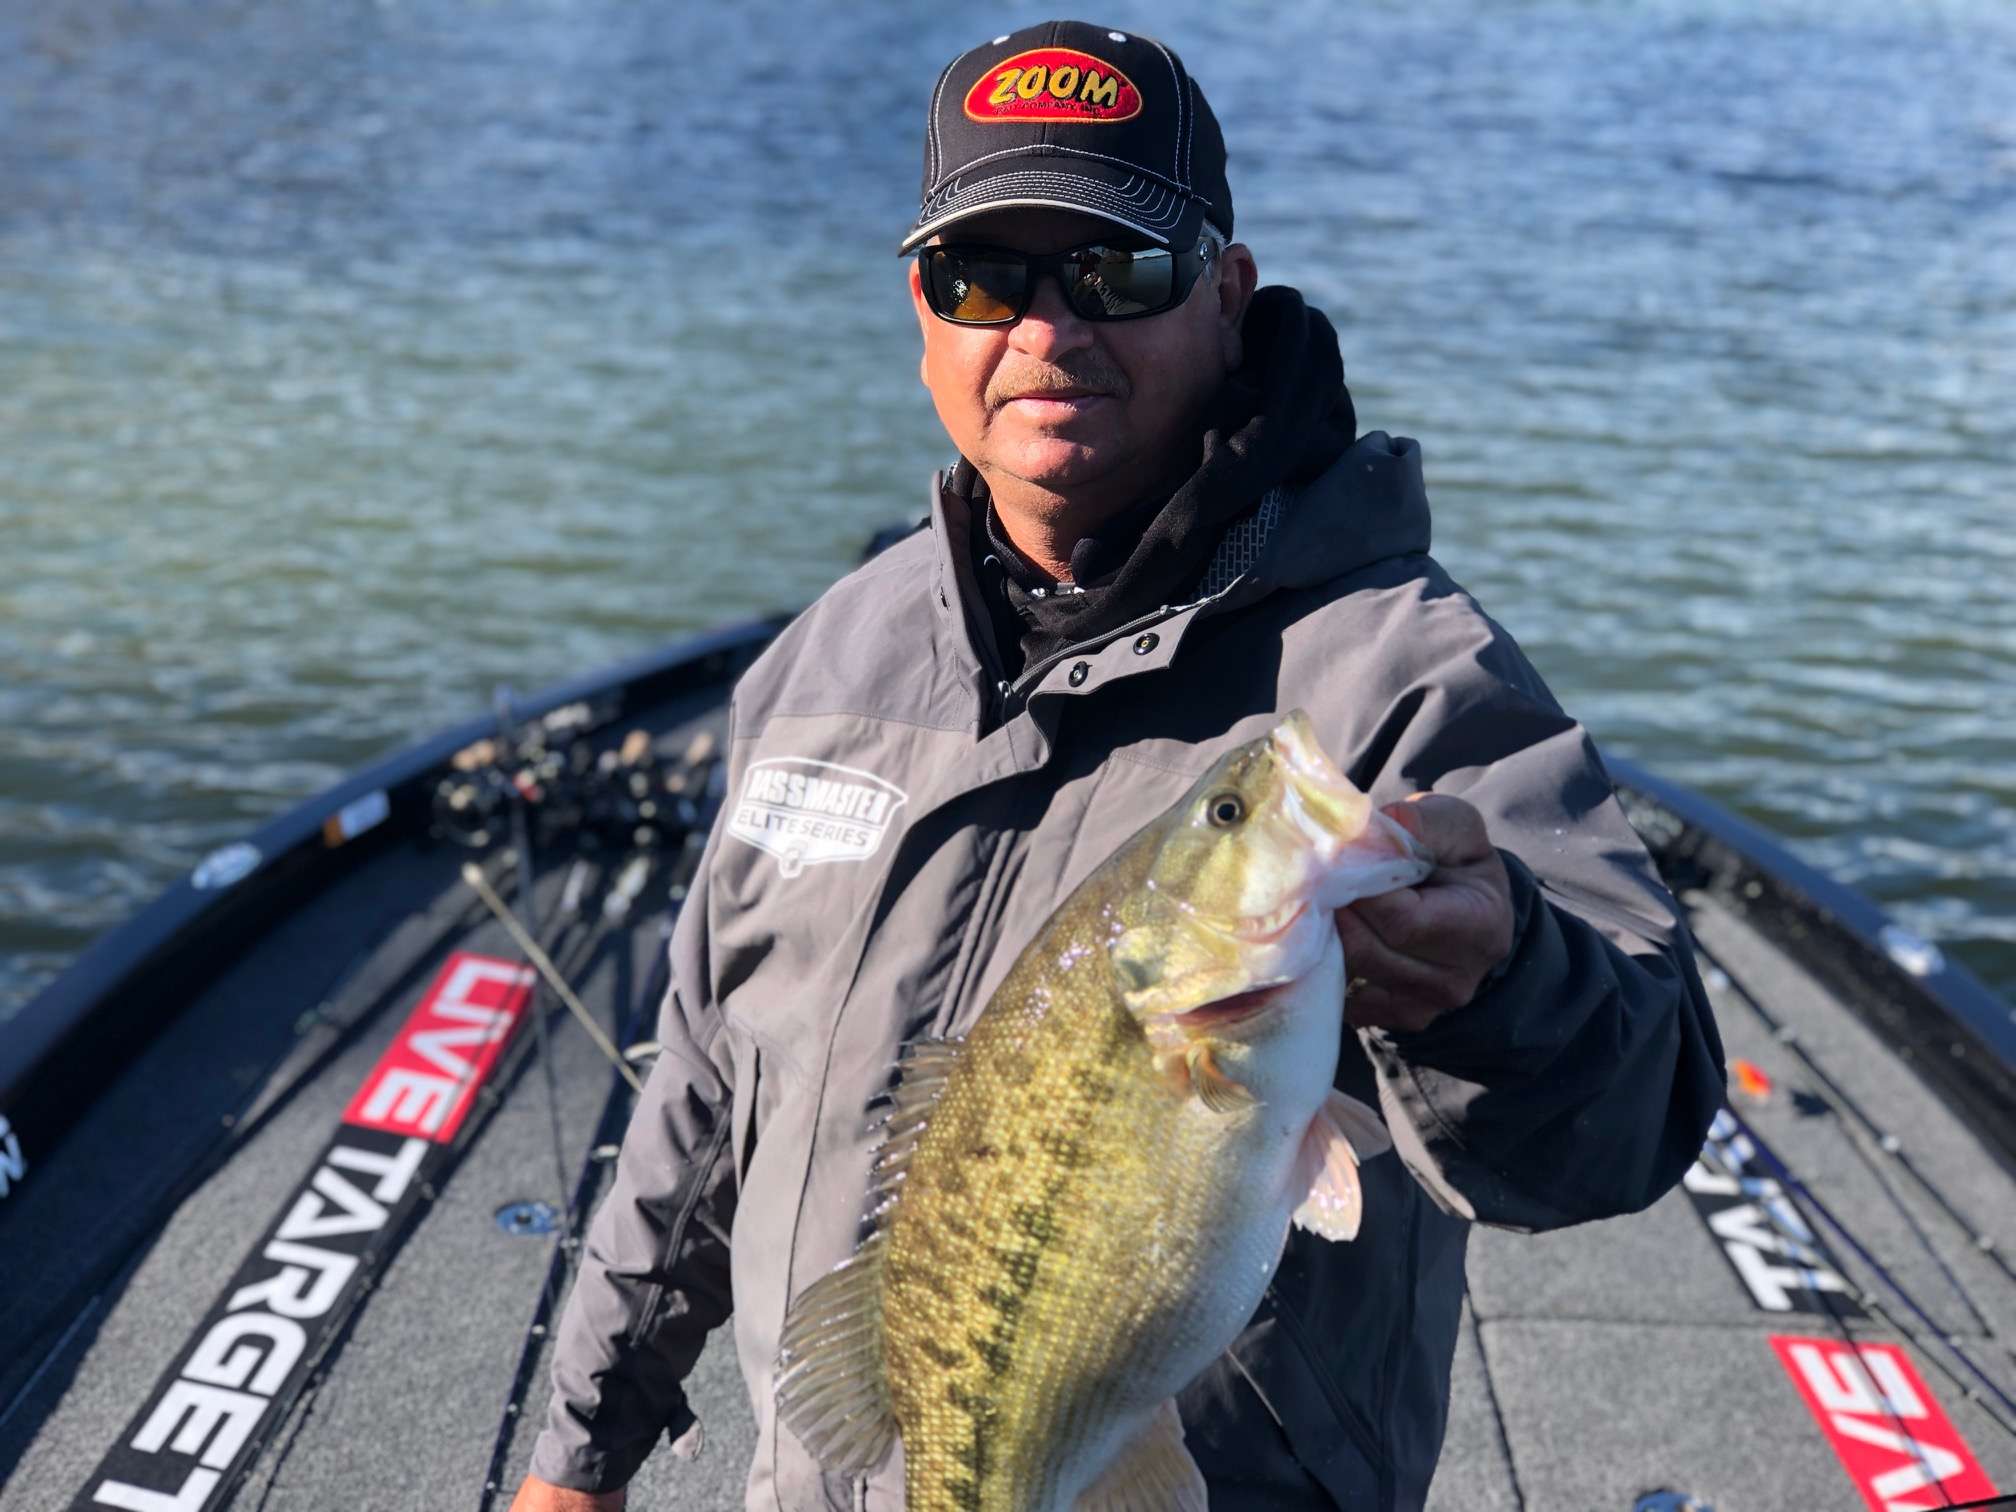 Todd Auten breaks a morning-long dry spell with a Lake Lanier stud for his first keeper of the day!